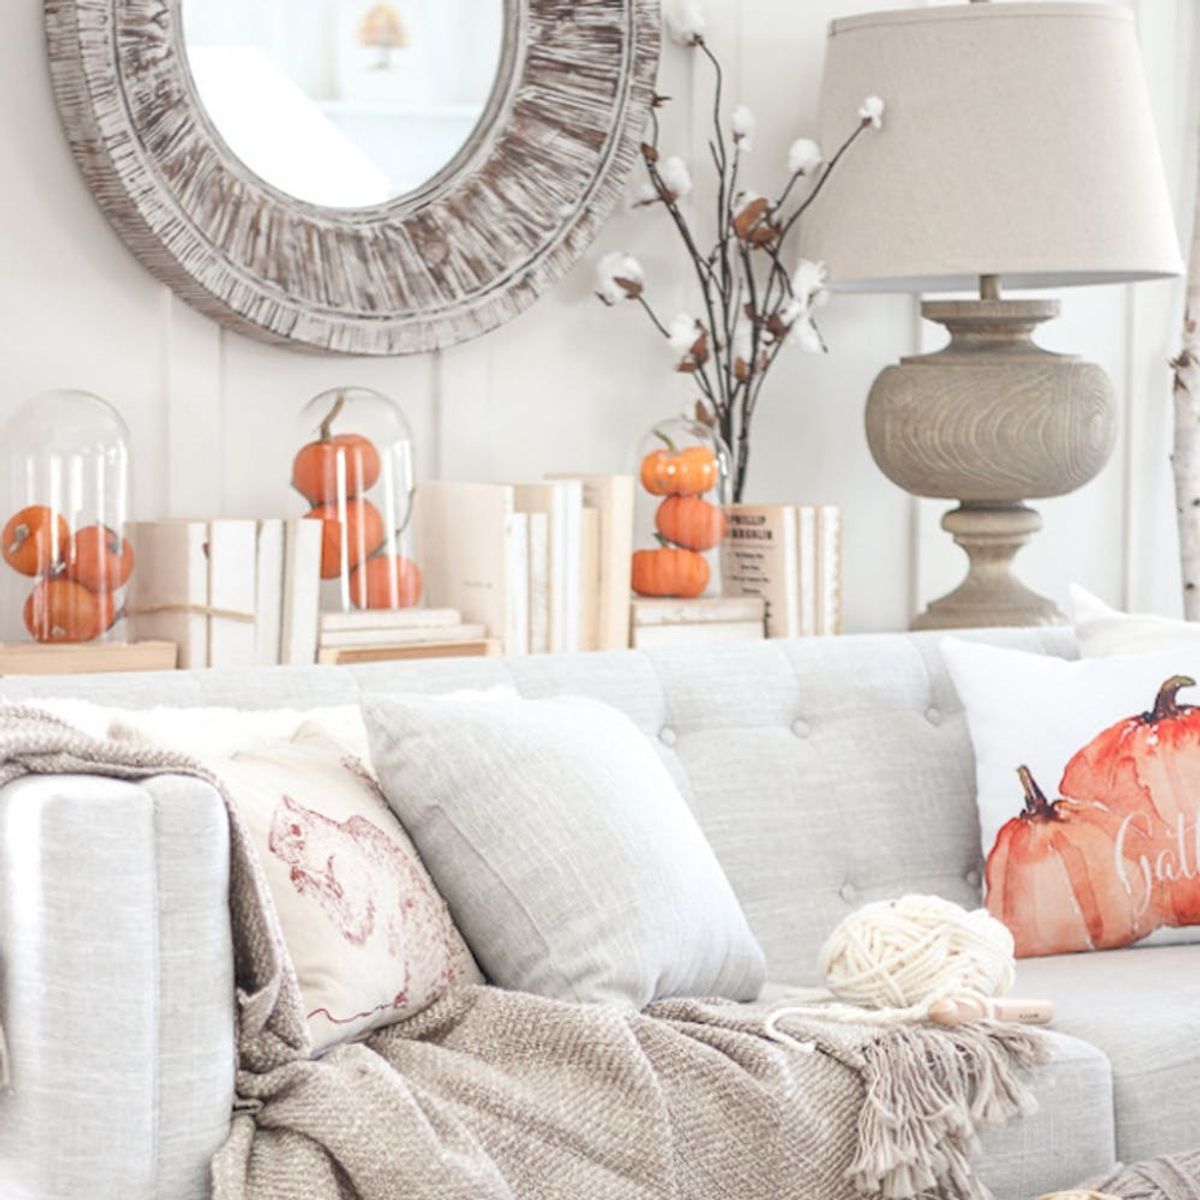 21 Chic Halloween Decor Ideas to Elevate Your Spooky Home